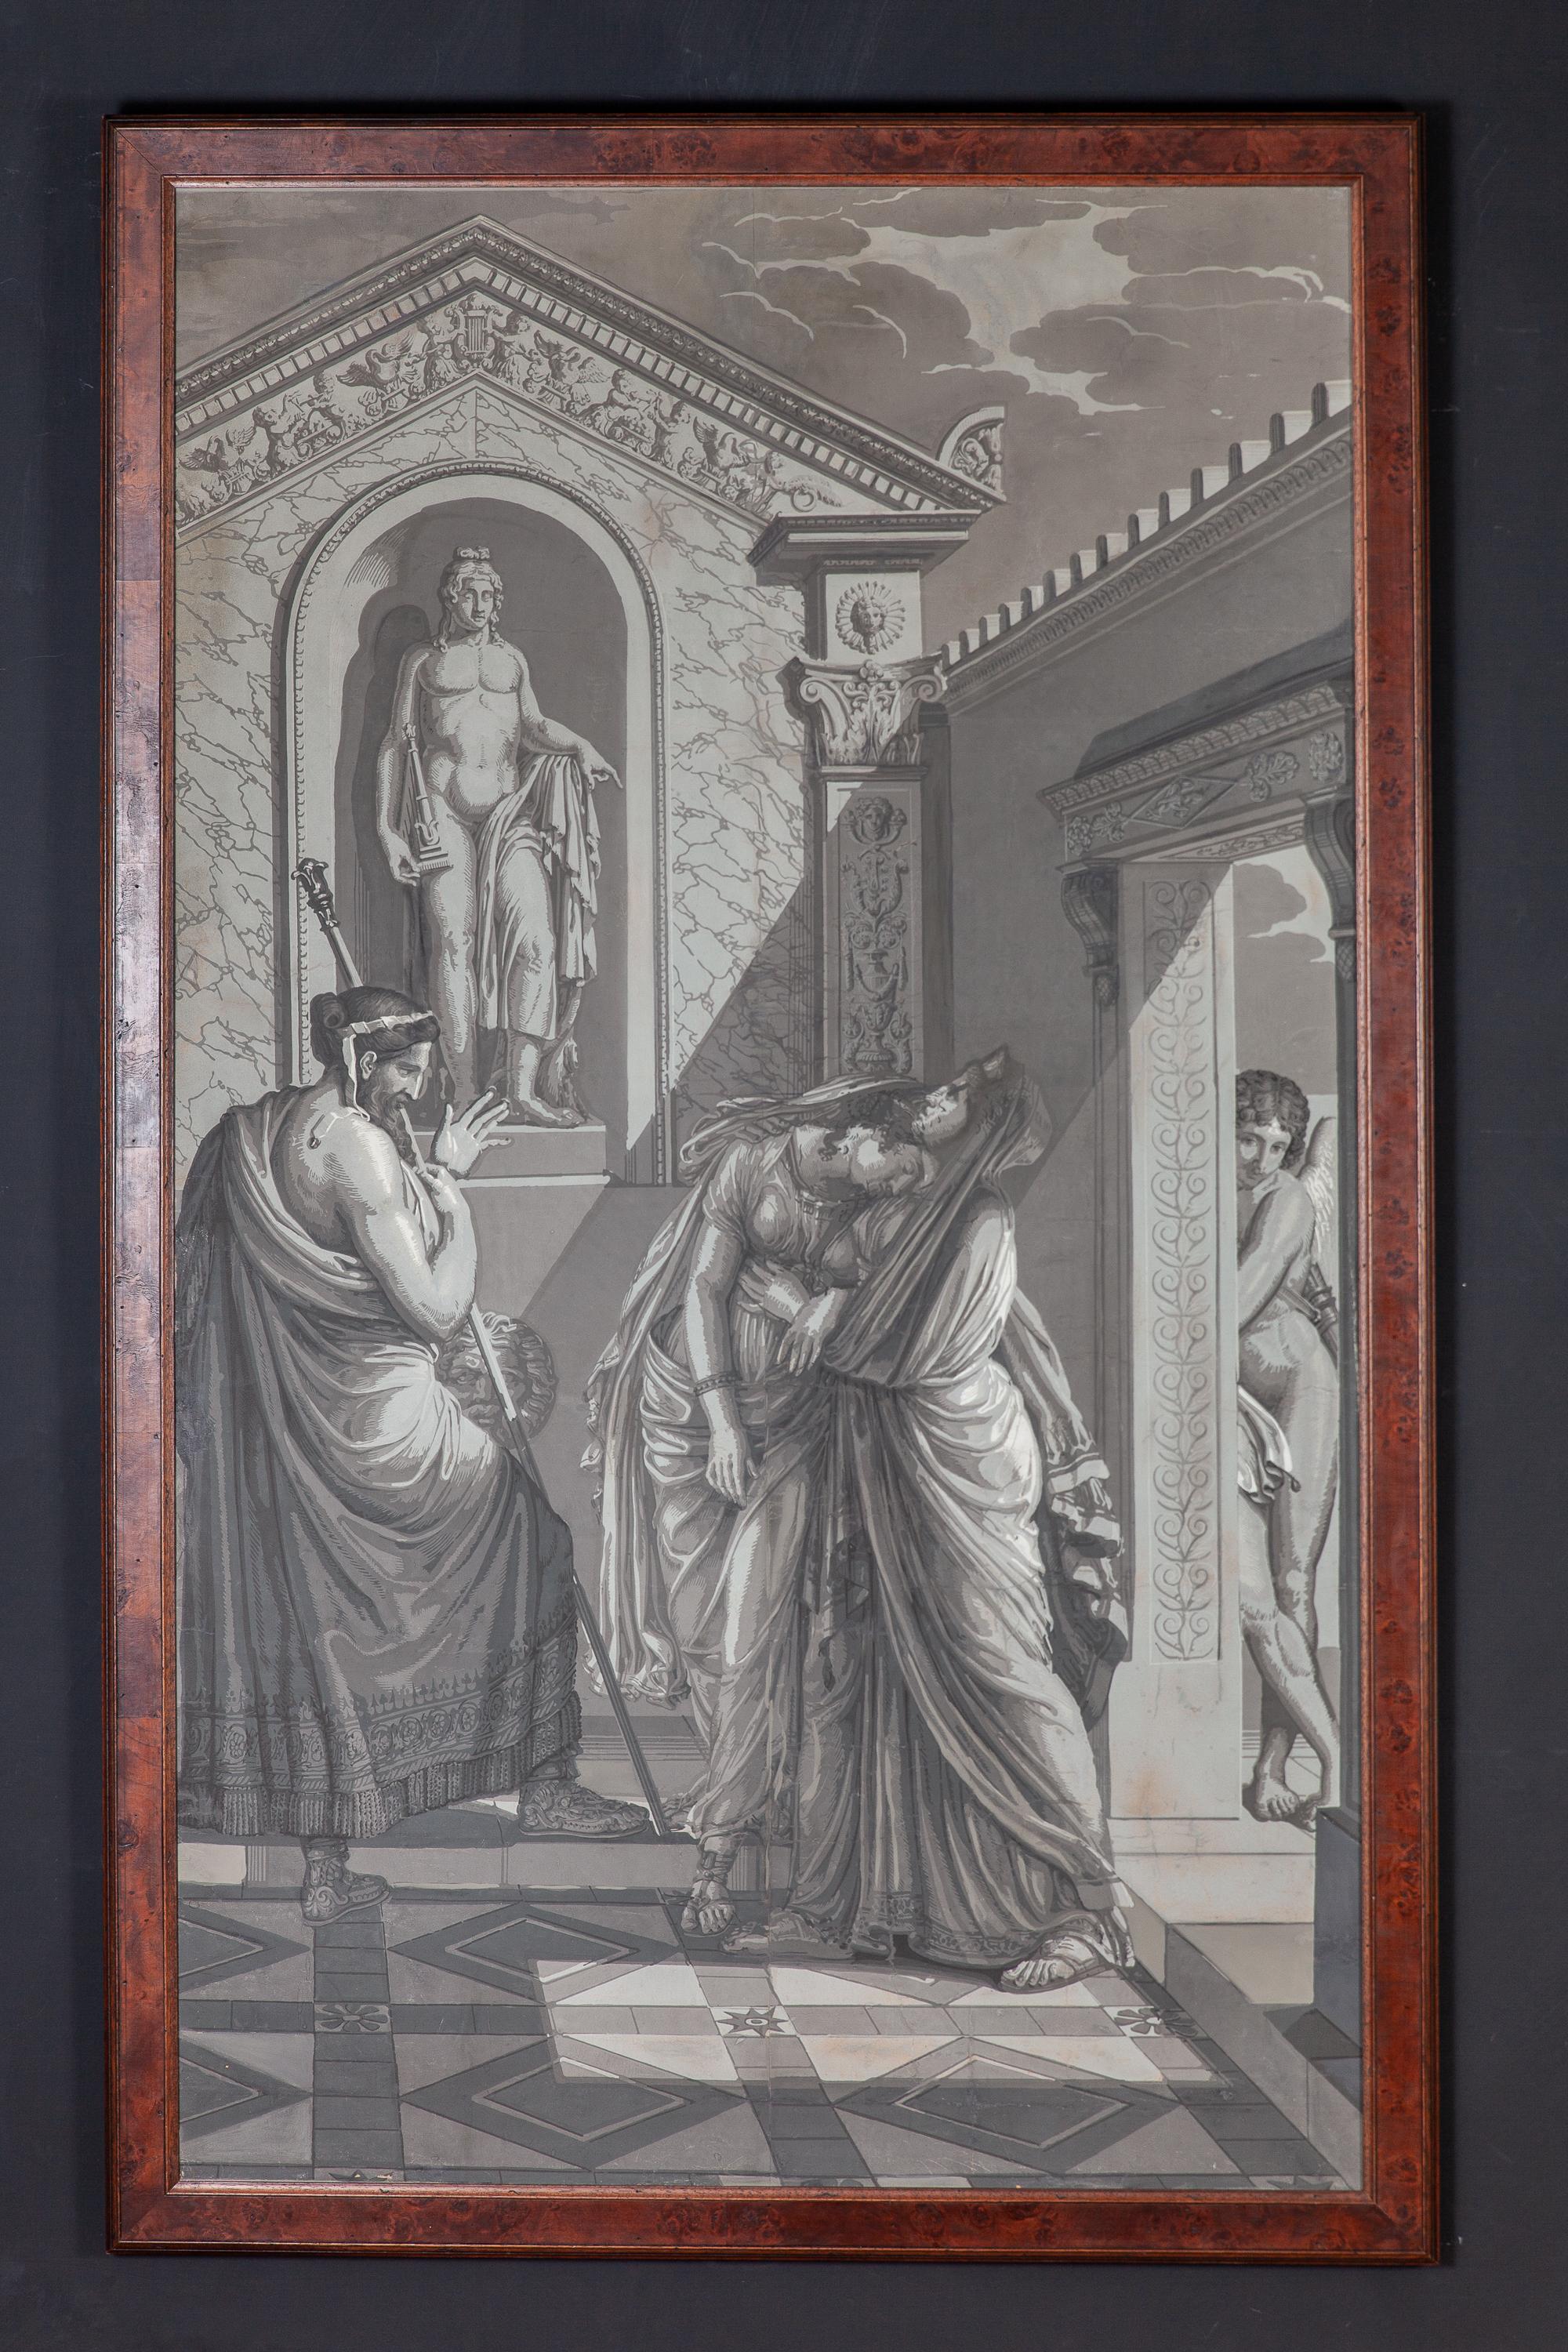 A Pair of  Wall Decoration 'En Grisaille' by Dufour, Paris, France, 19th Century